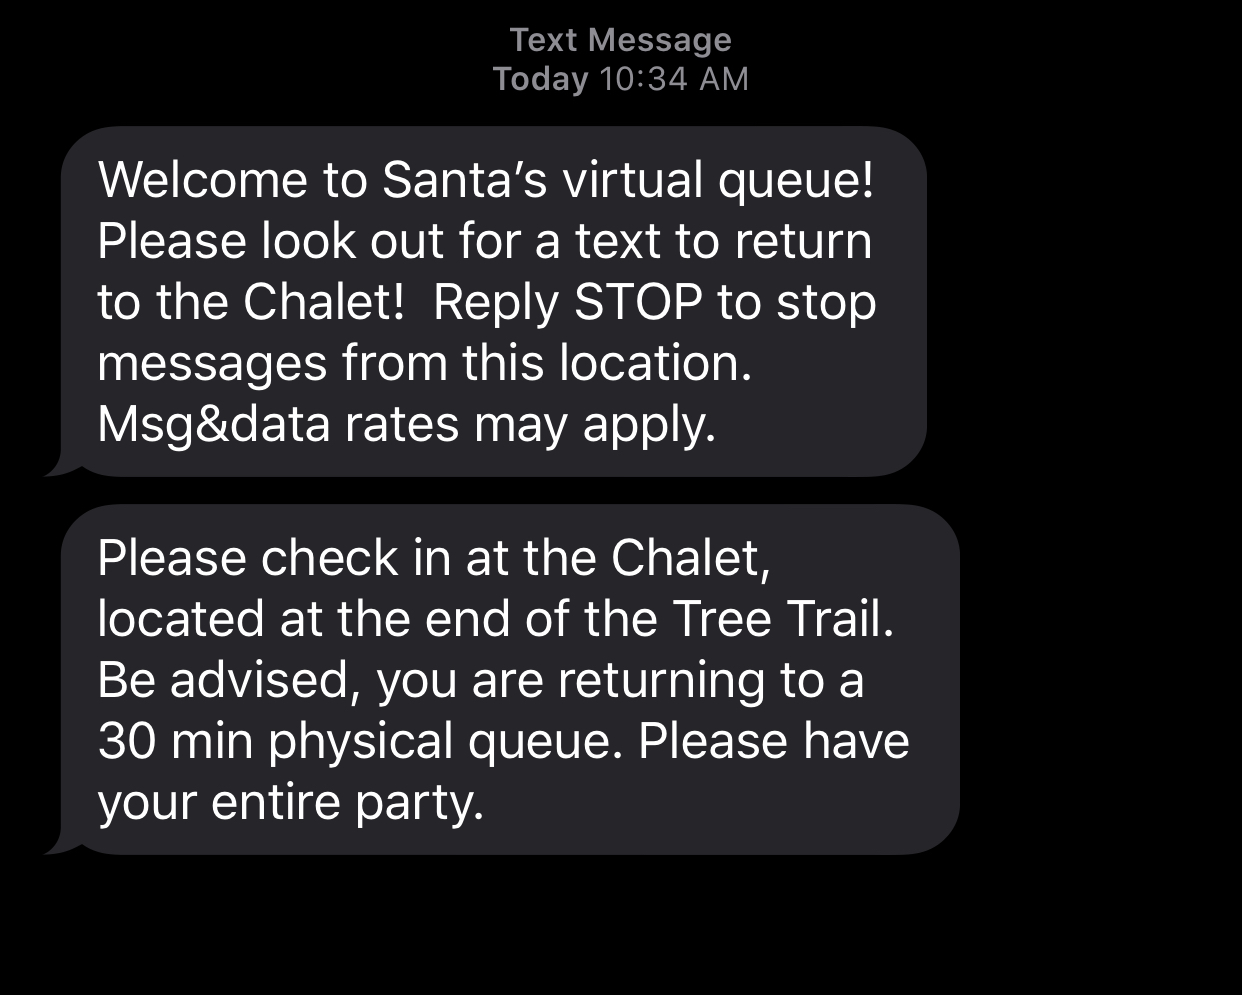 Disney Springs Christmas Tree Trail 2019 Text Messages